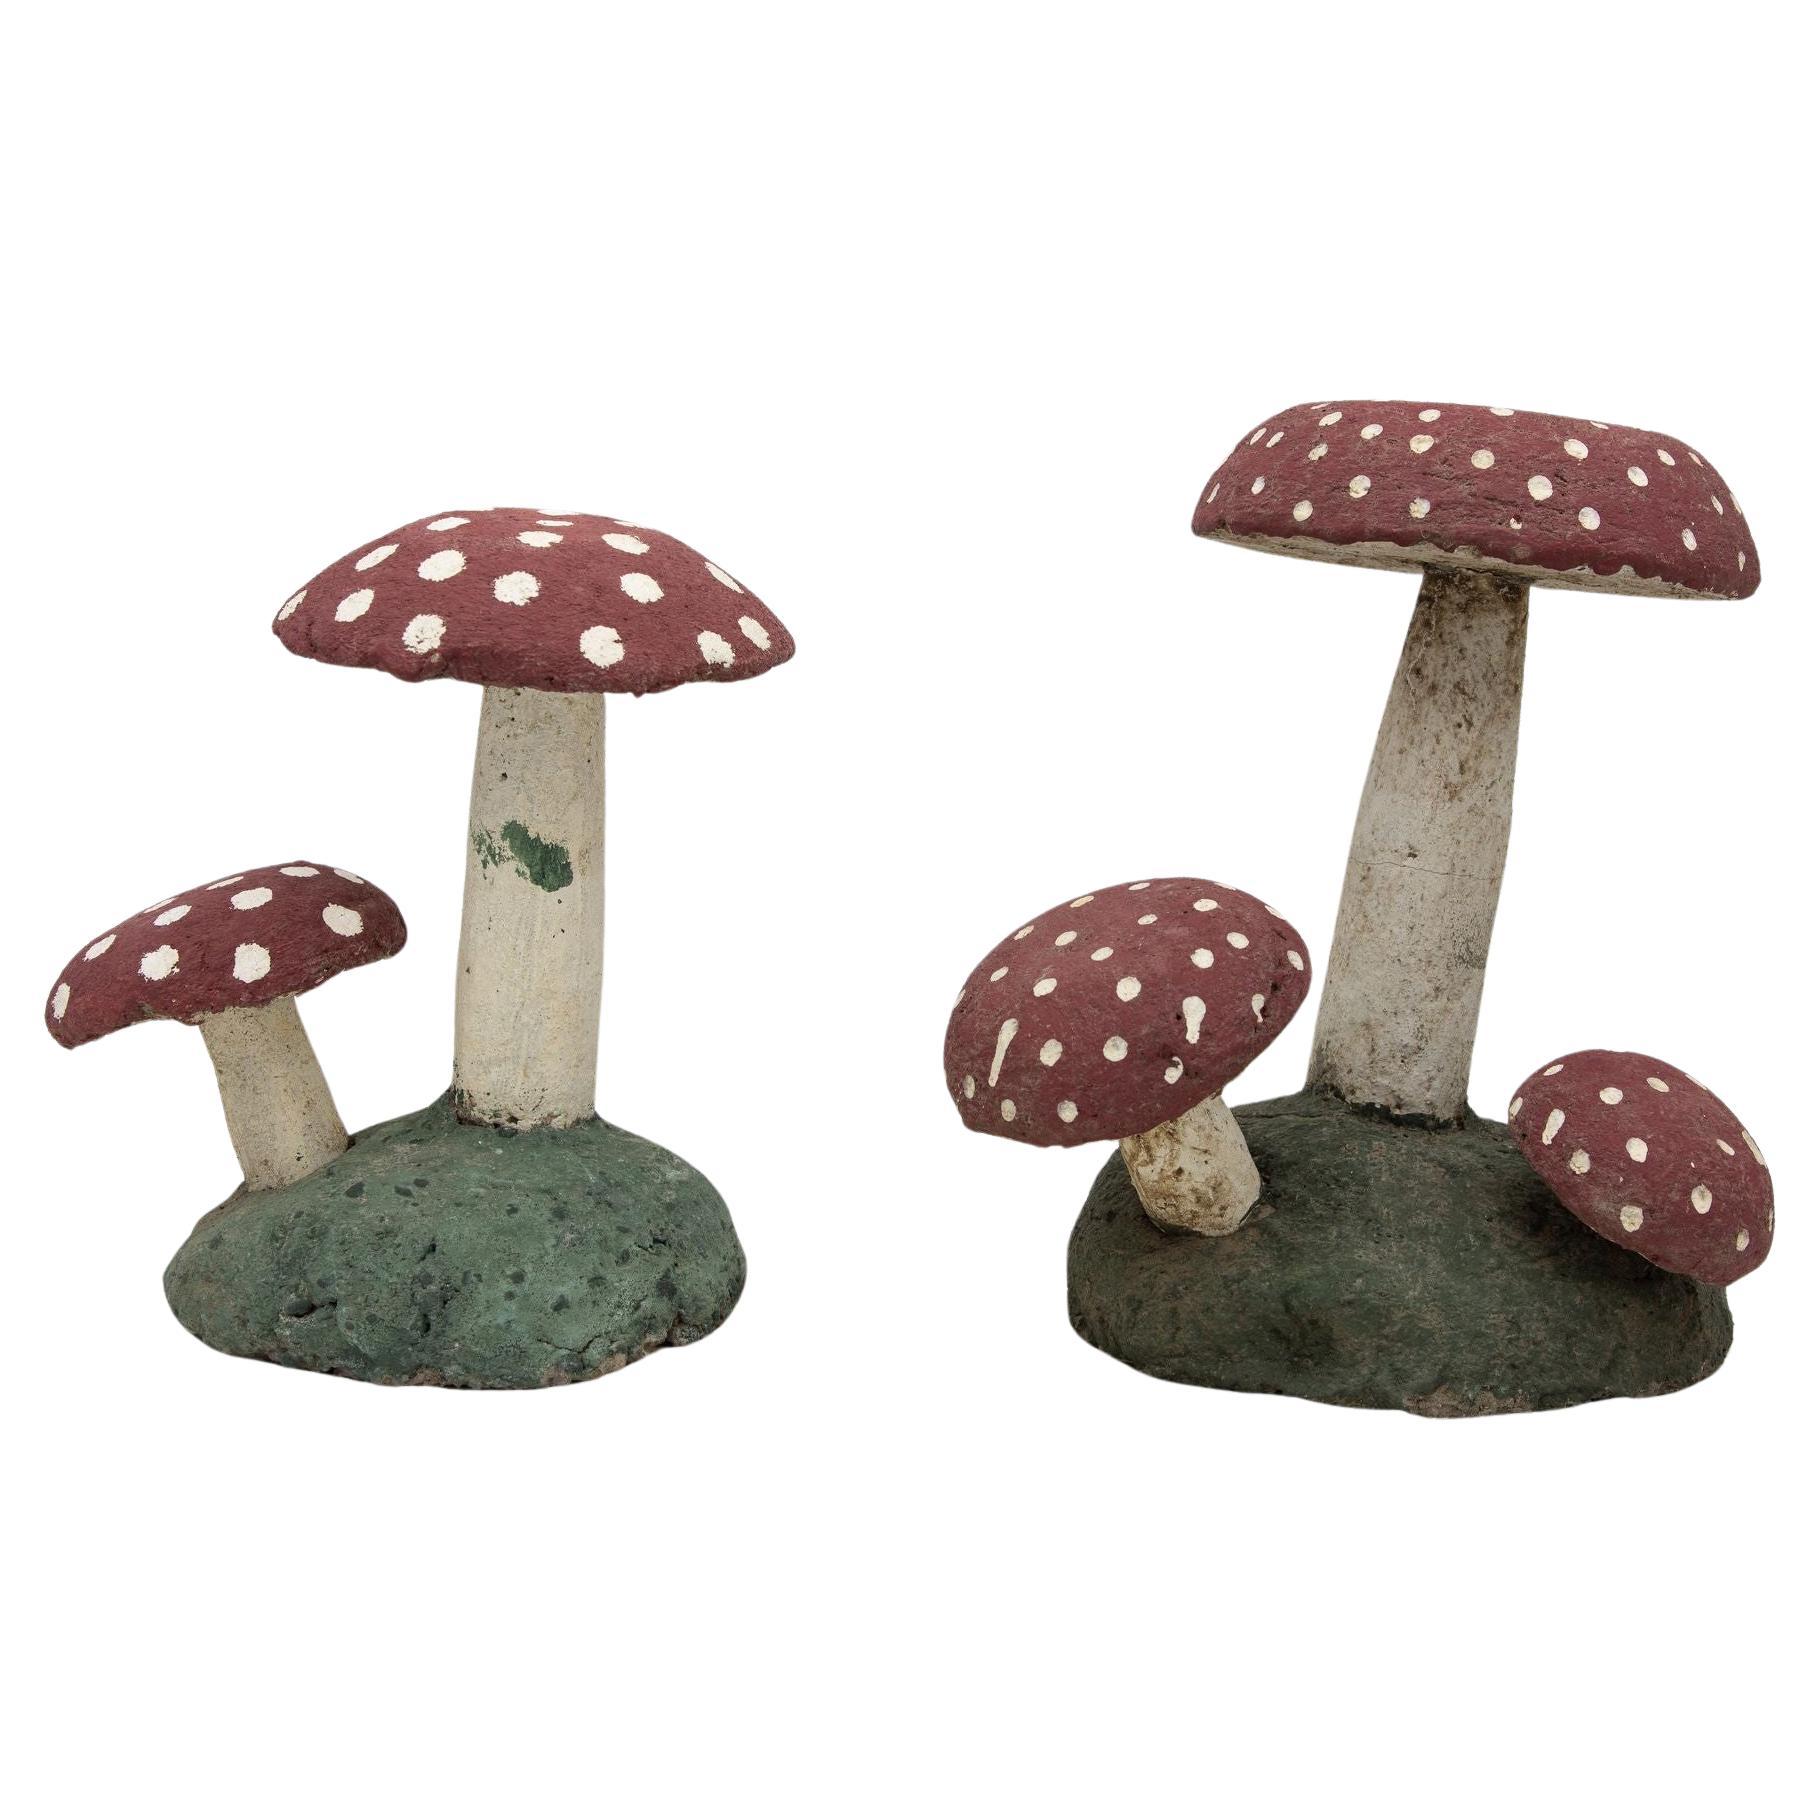 Pair Vintage Painted Stone Toadstool Mushrooms with Red Caps